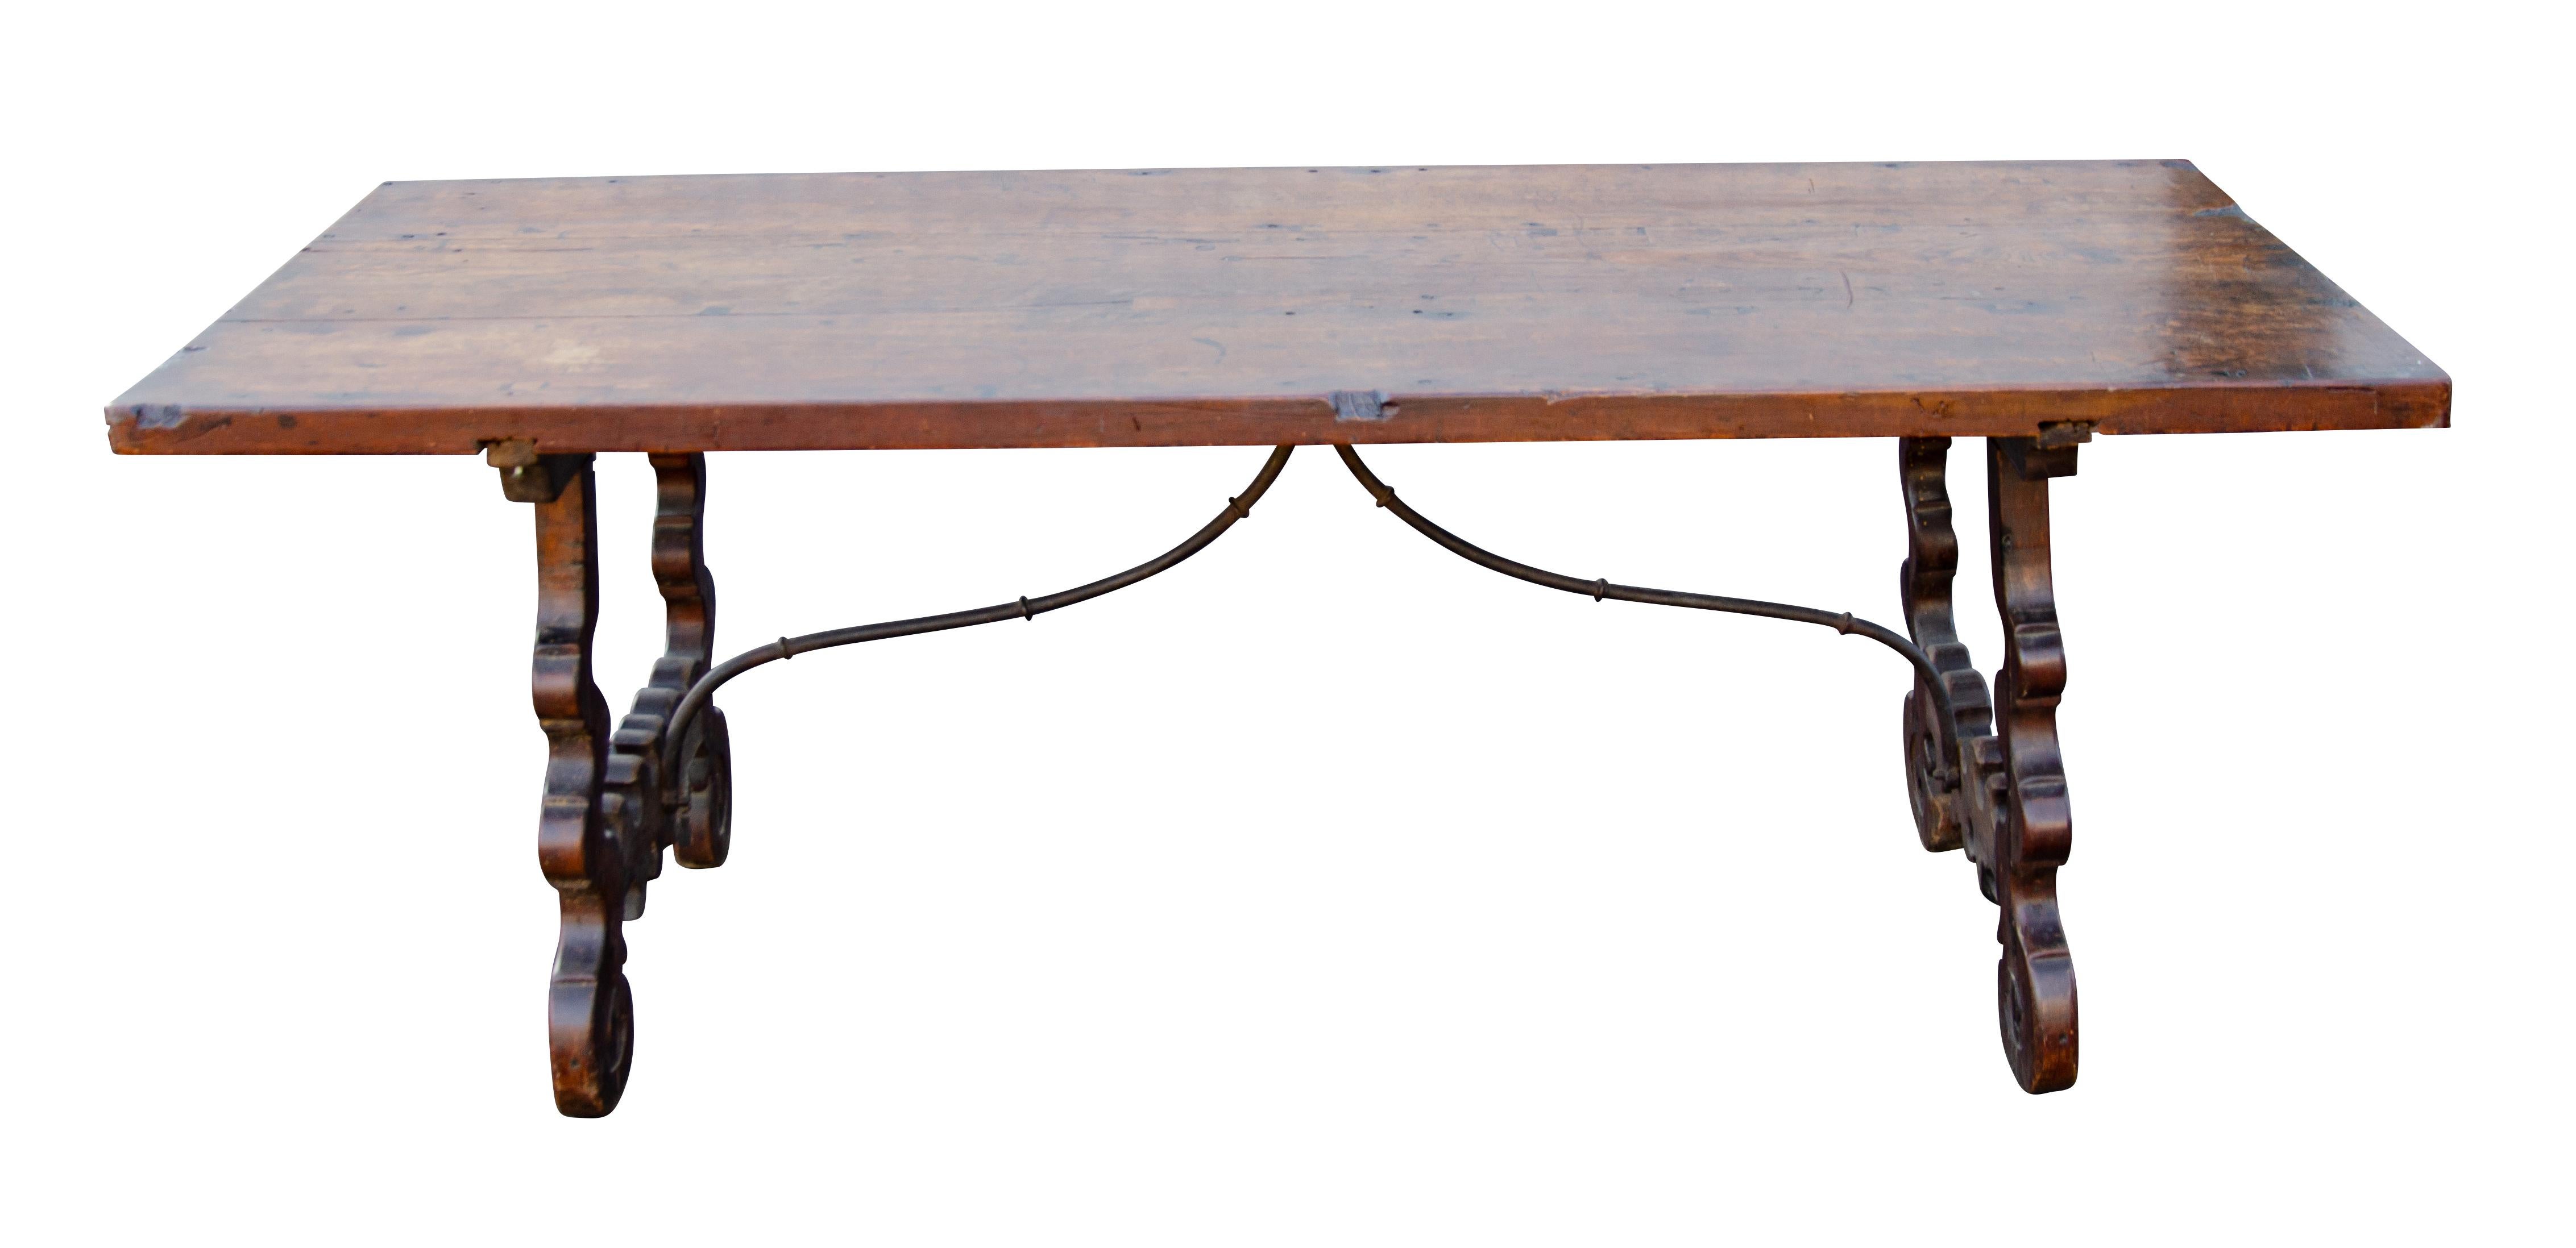 With three board rectangular top raised on scroll cut legs joined by wrought iron stretchers.